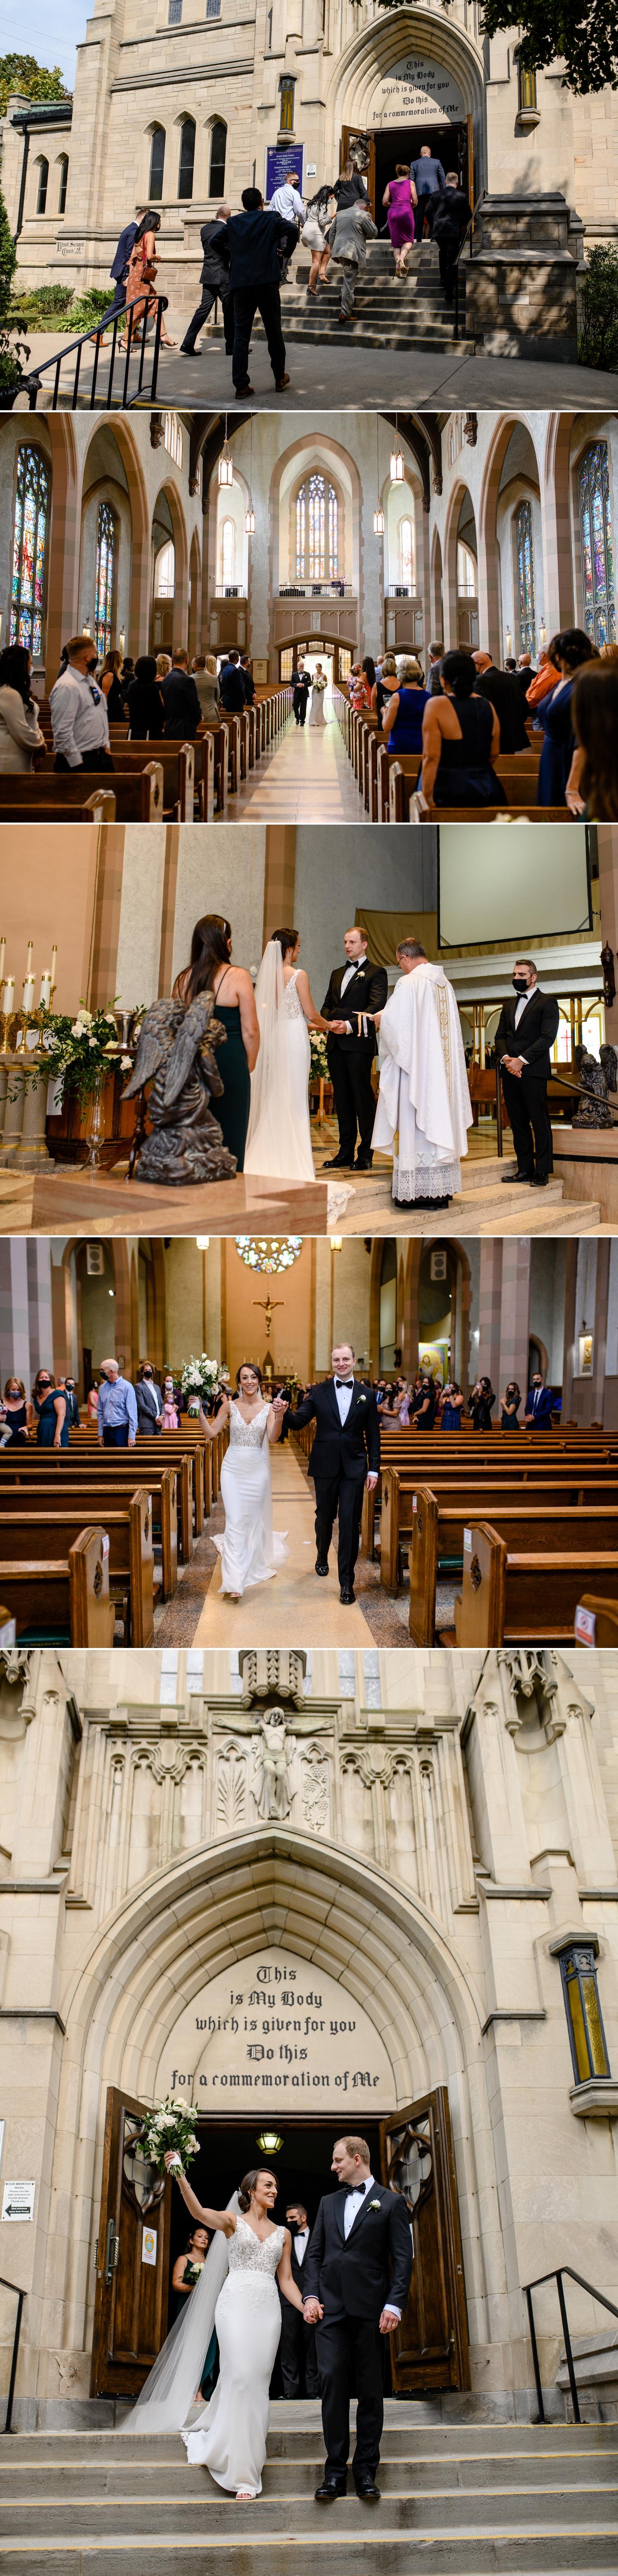 photographs from a wedding at blessed sacrament church in ottawa